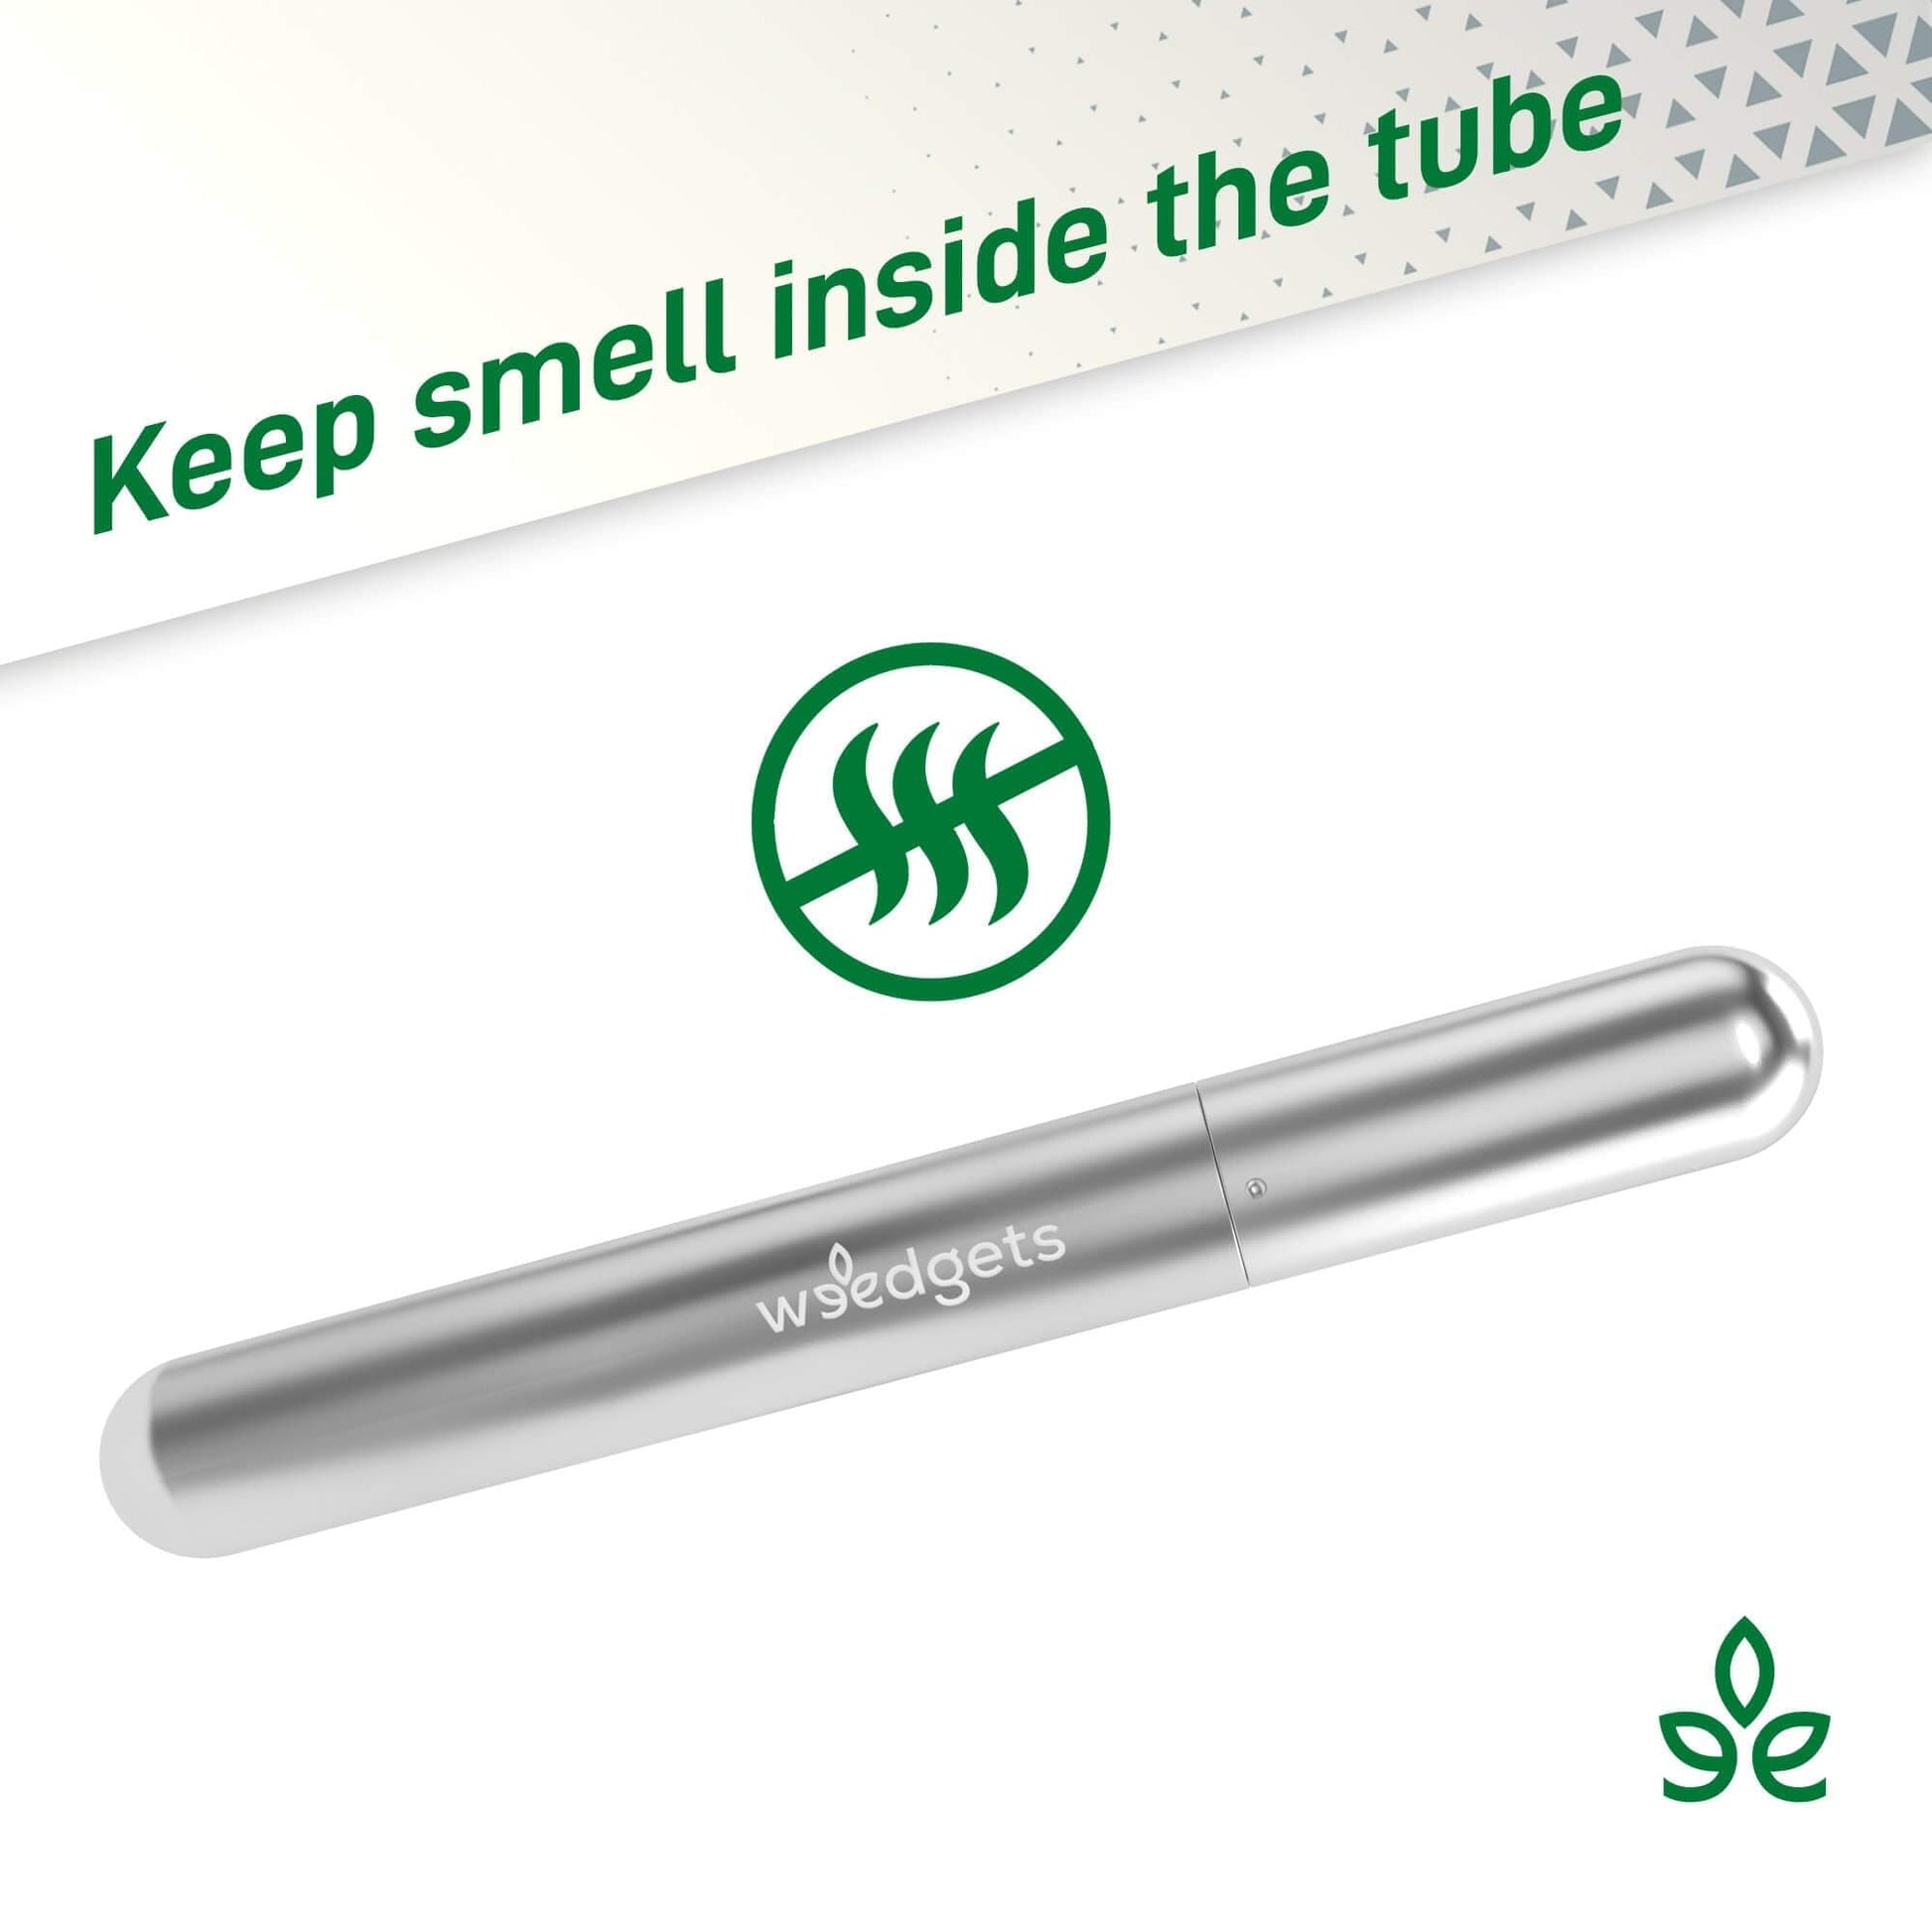 Smell Proof Tube 